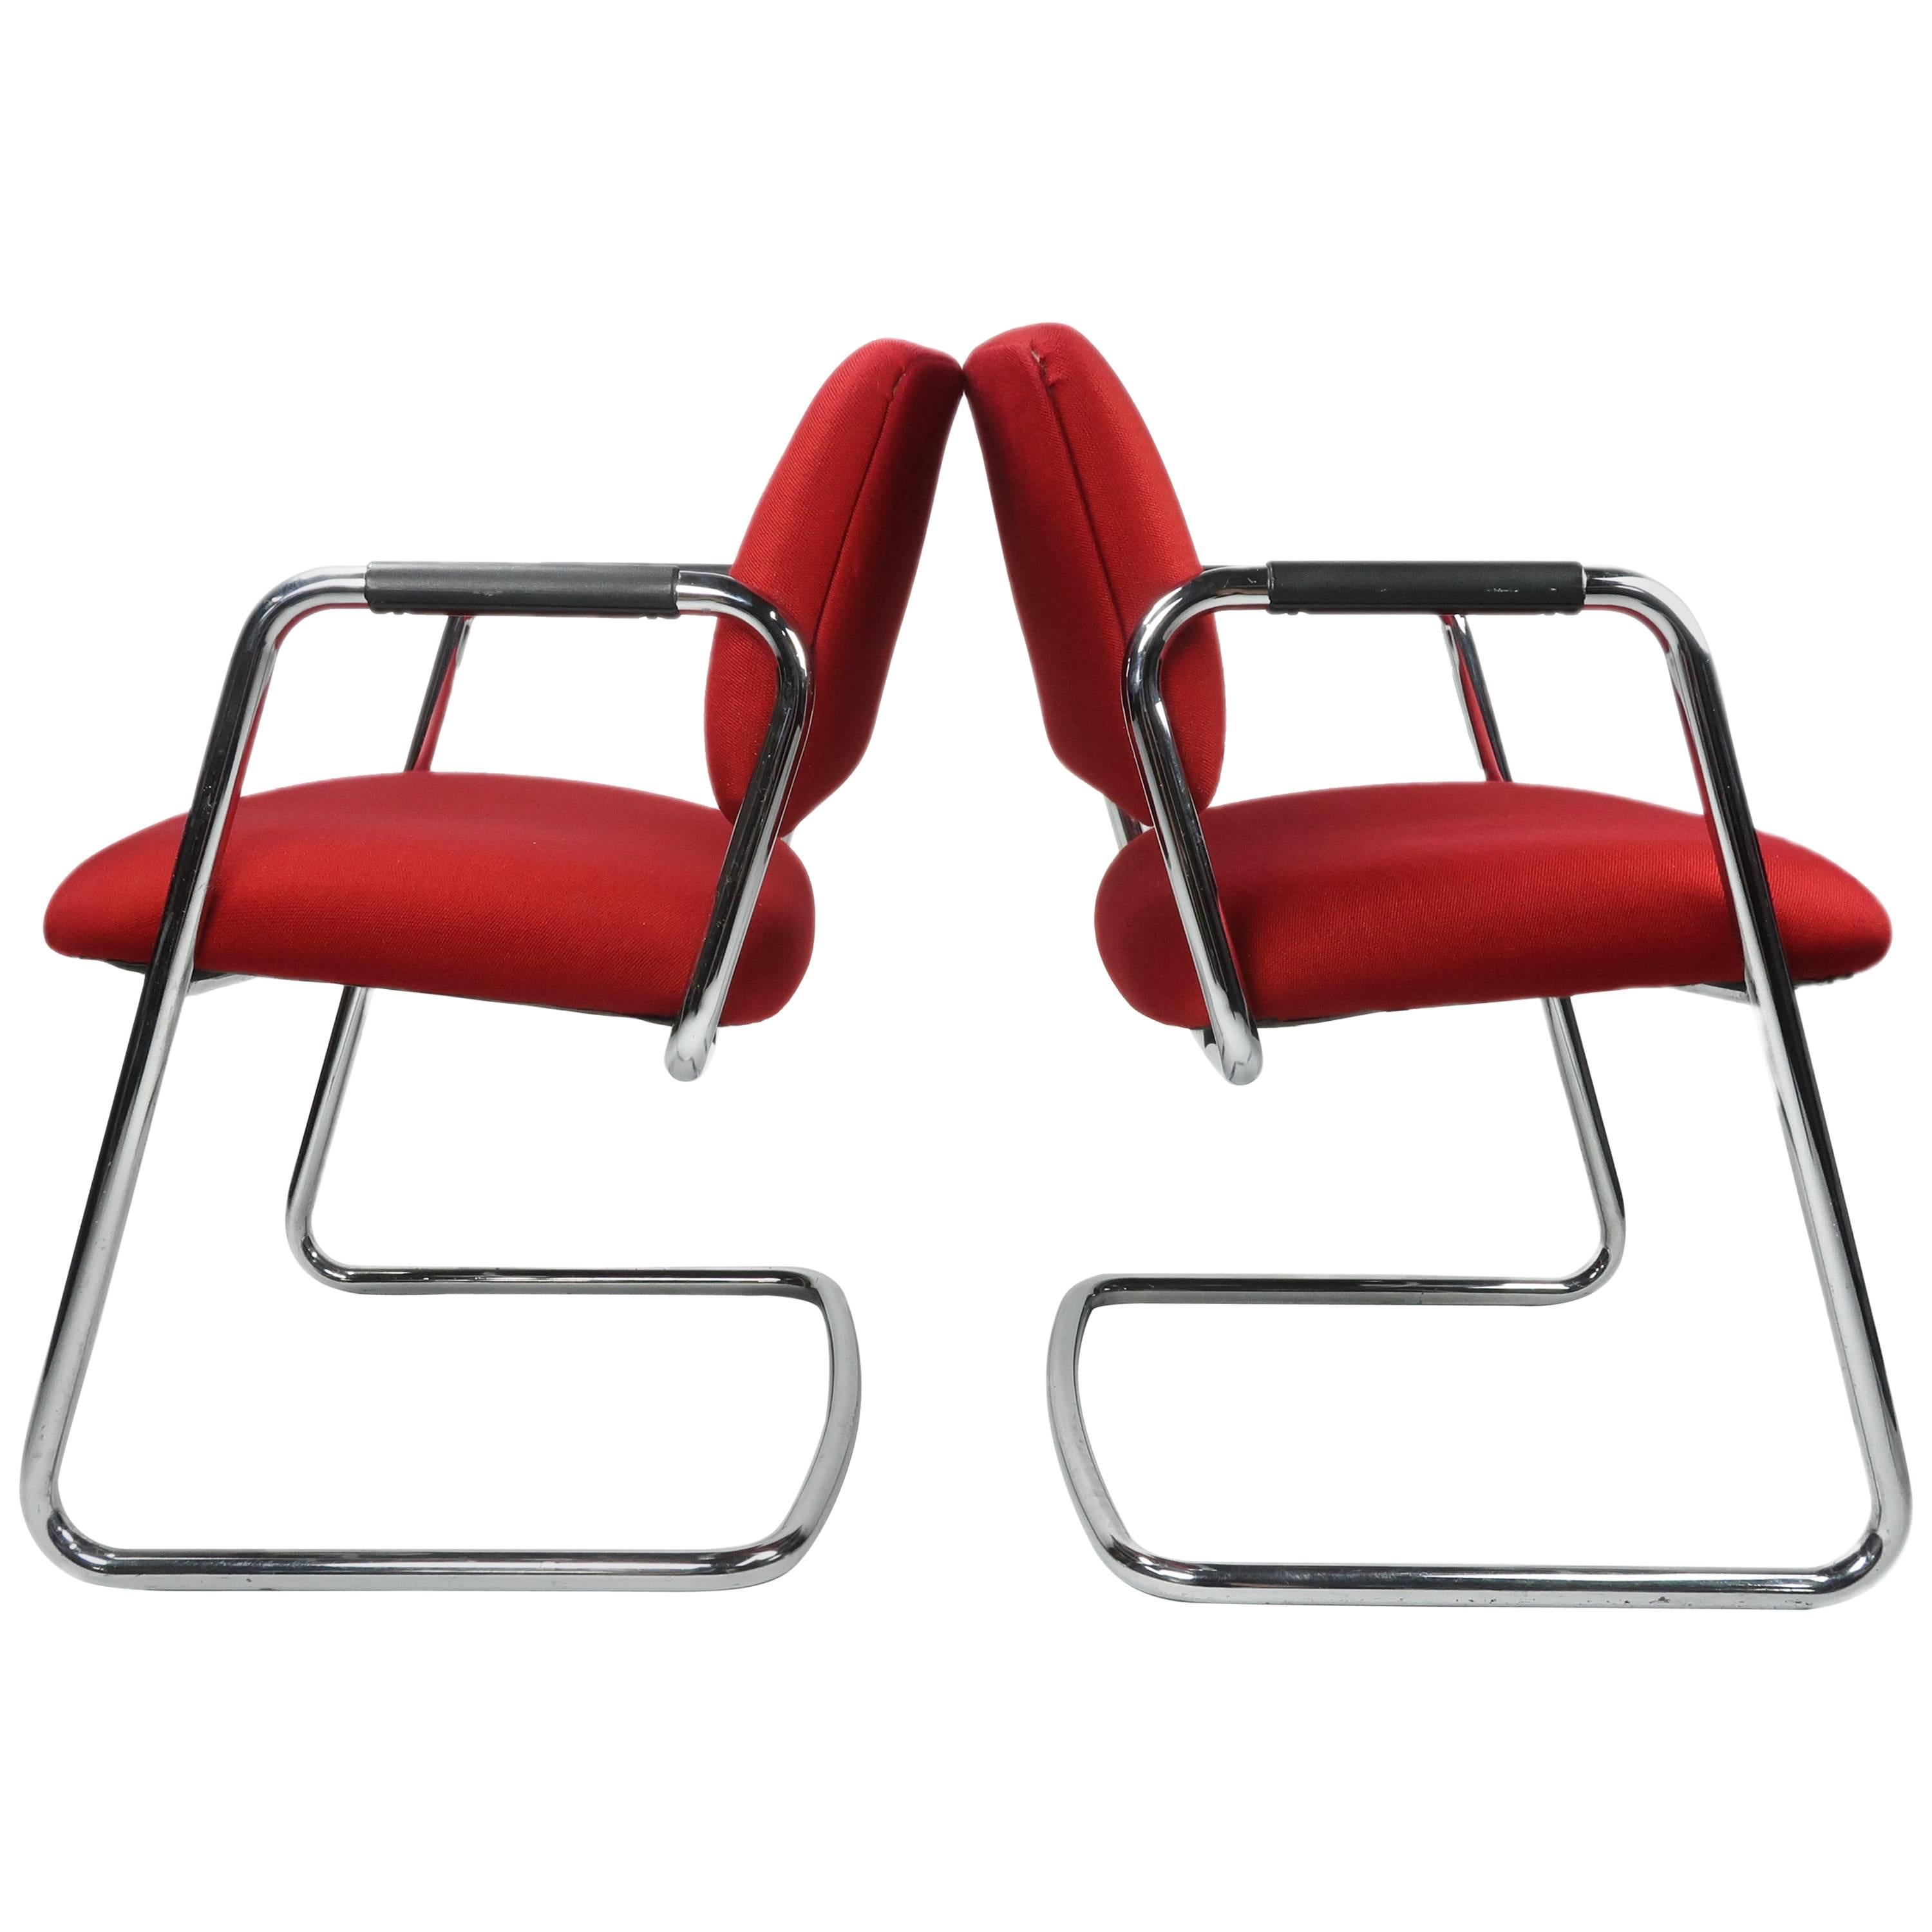 Pair of Red Steelcase Chairs